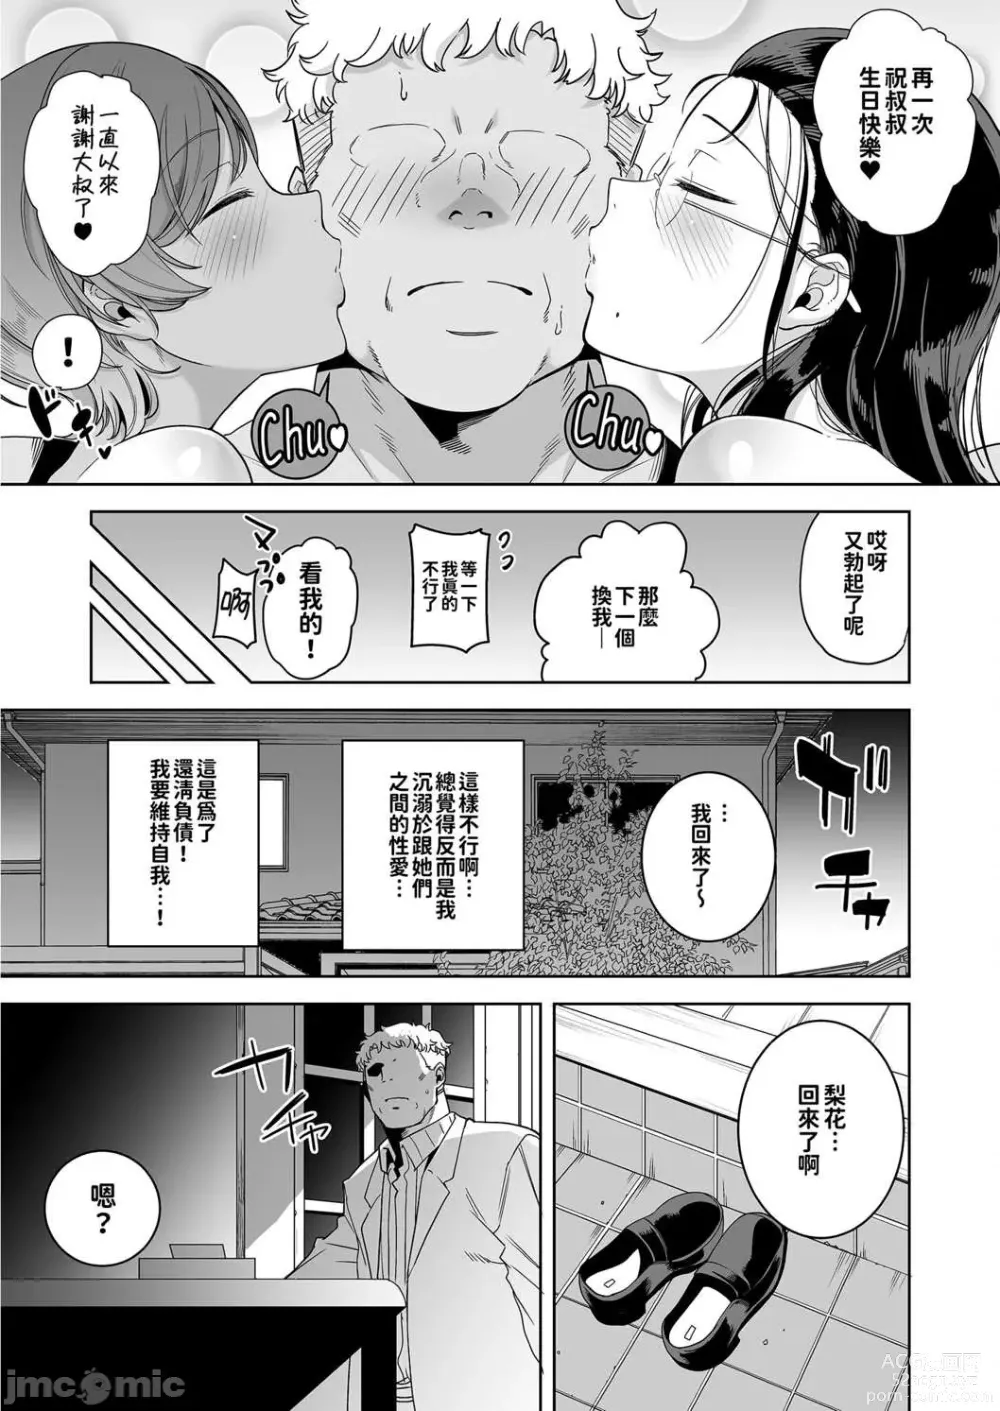 Page 39 of doujinshi 聖華女学院高等部公認竿おじさん 3